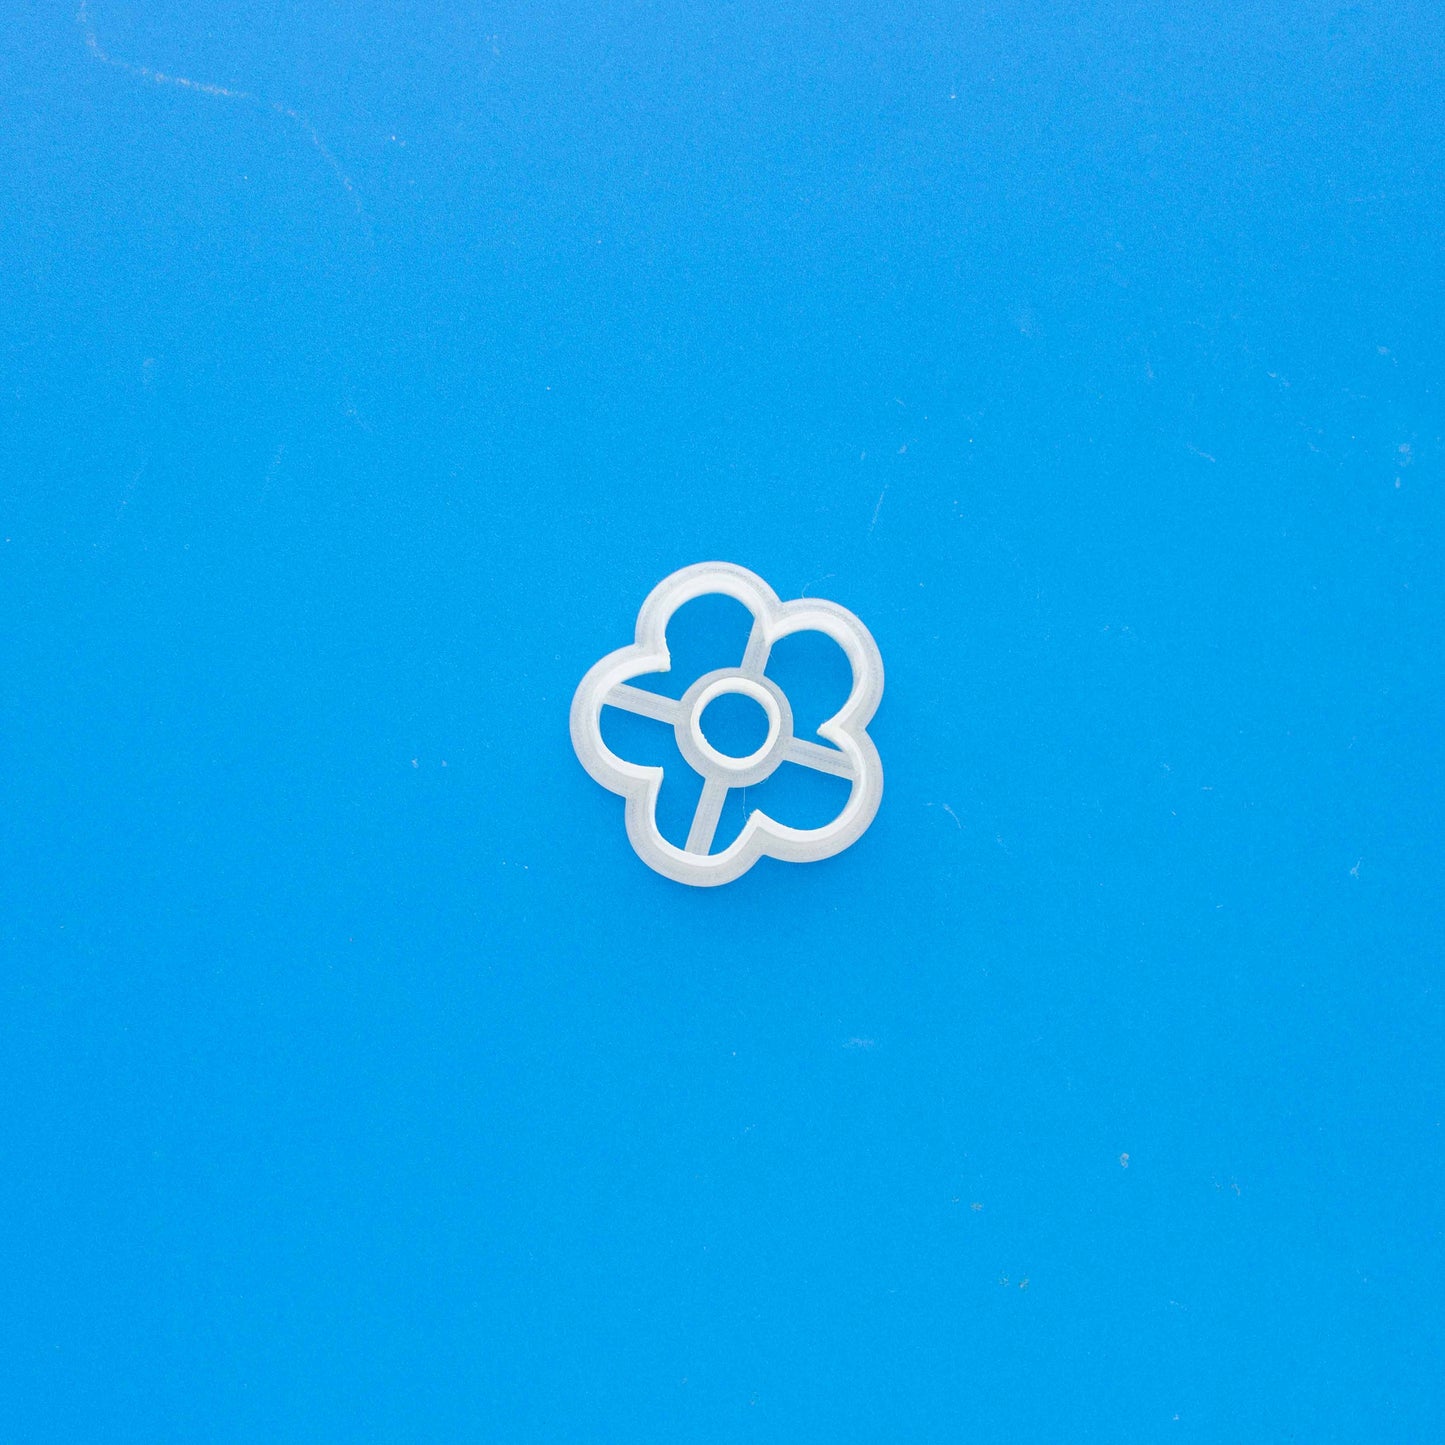 Daisy polymer clay cutter on a blue background